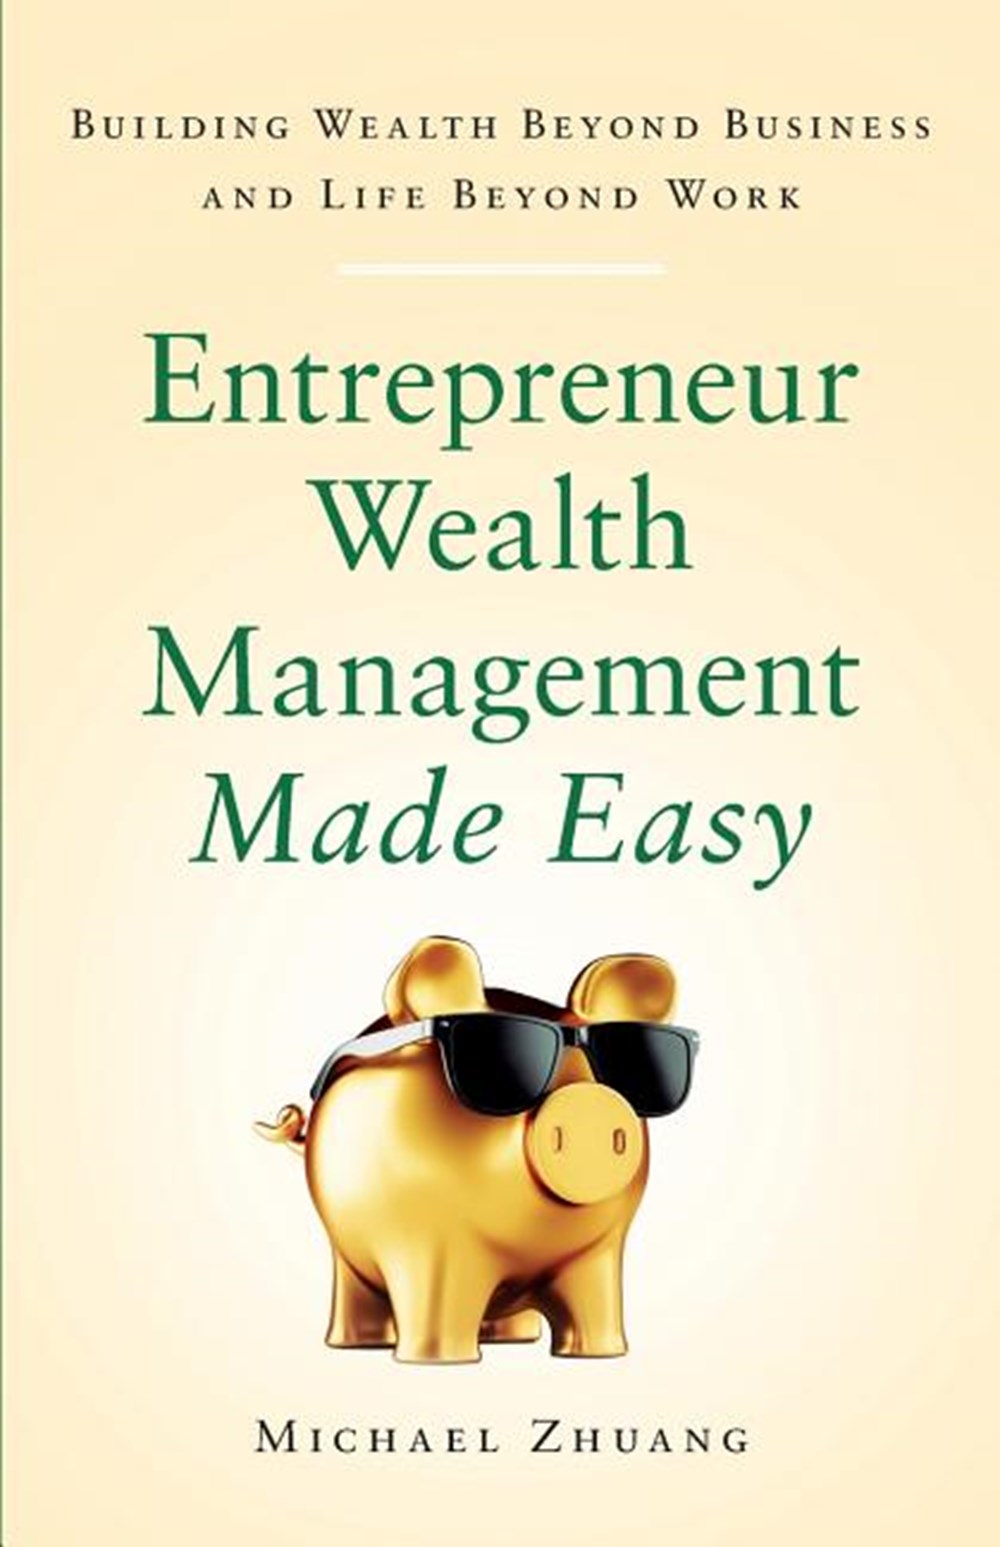 Entrepreneur Wealth Management Made Easy: Building Wealth Beyond Business and Life Beyond Work